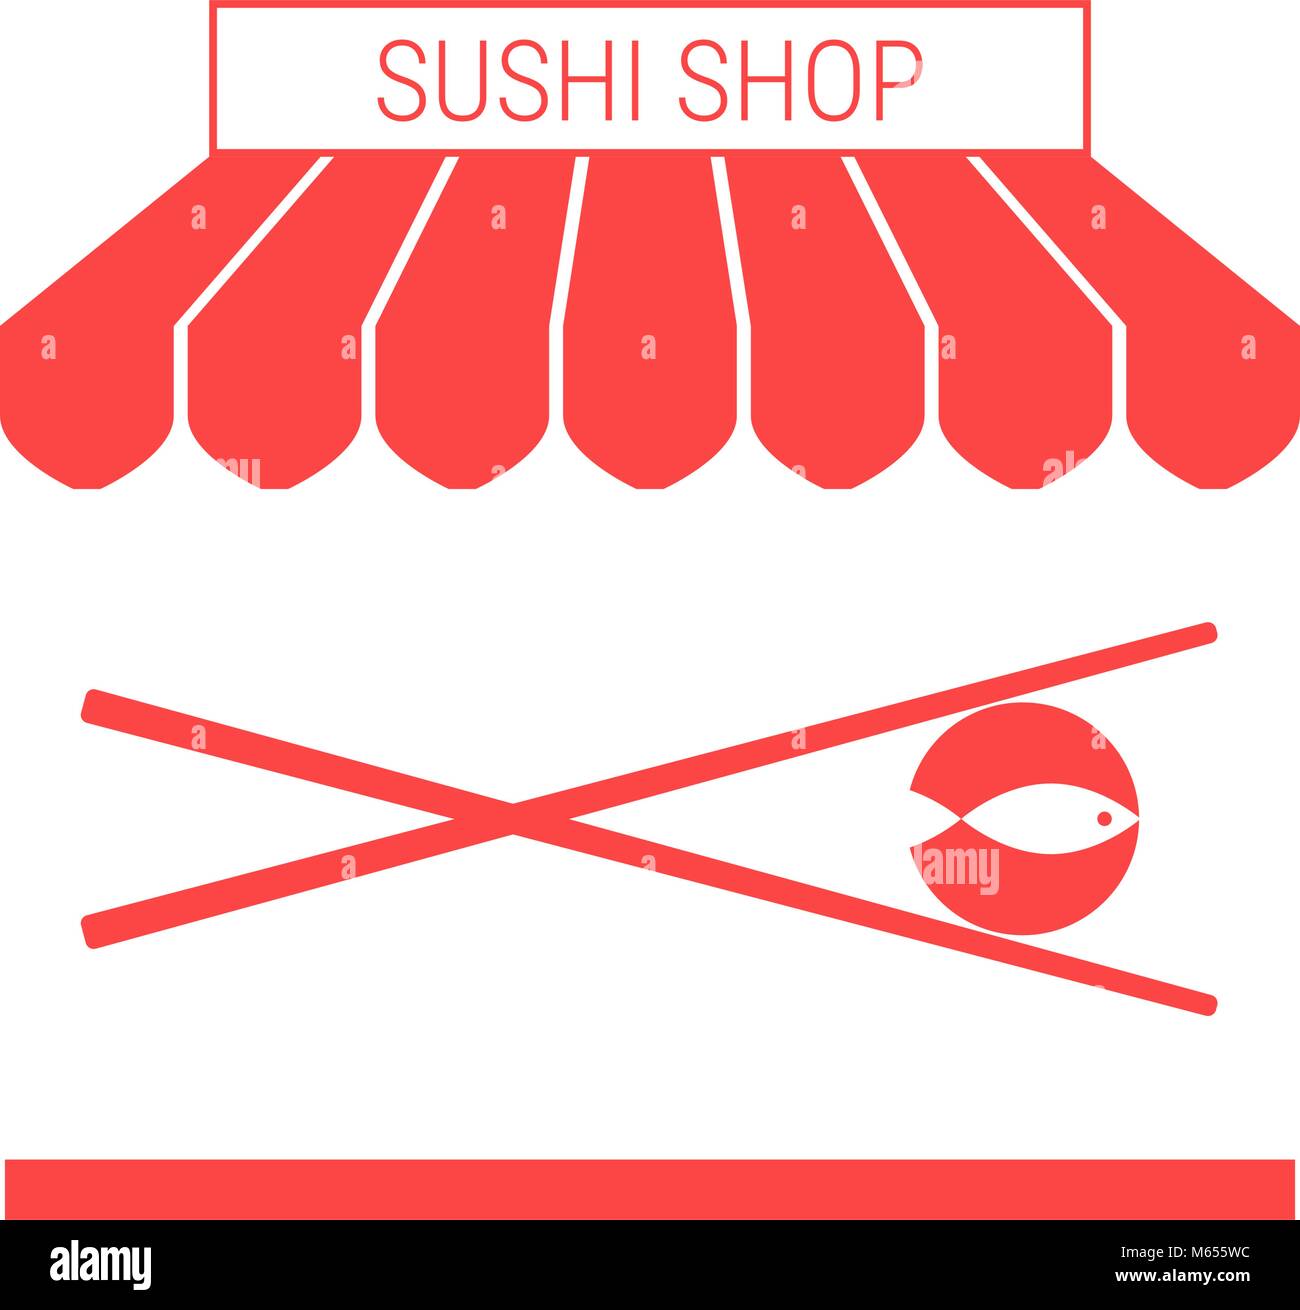 Sushi Shop, Japanese Restaurant Single Flat Vector Icon. Striped Awning and Signboard Stock Vector